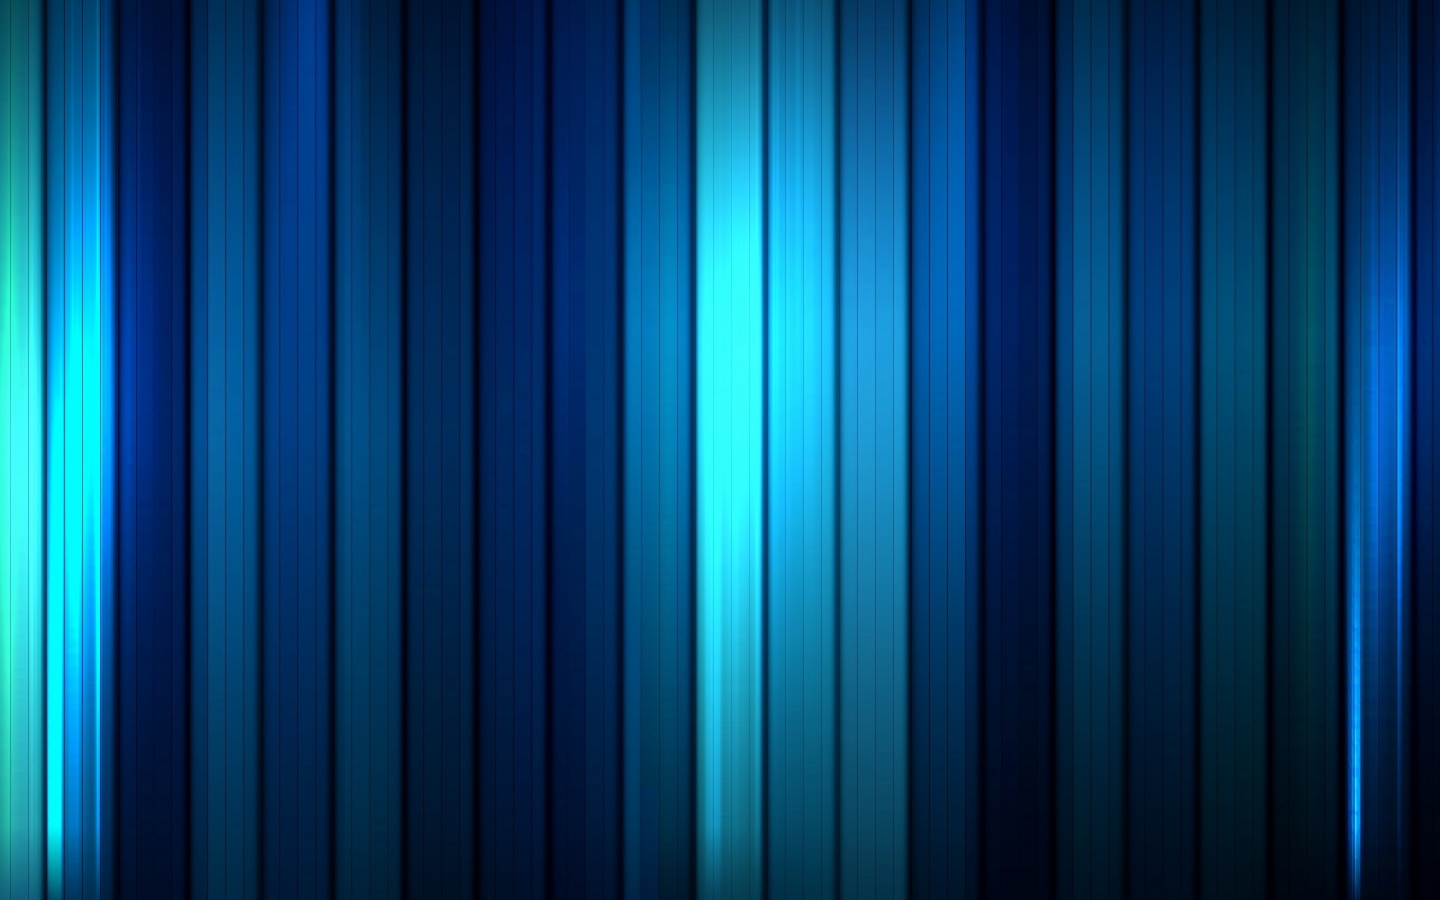 Motion Stripes for 1440 x 900 widescreen resolution